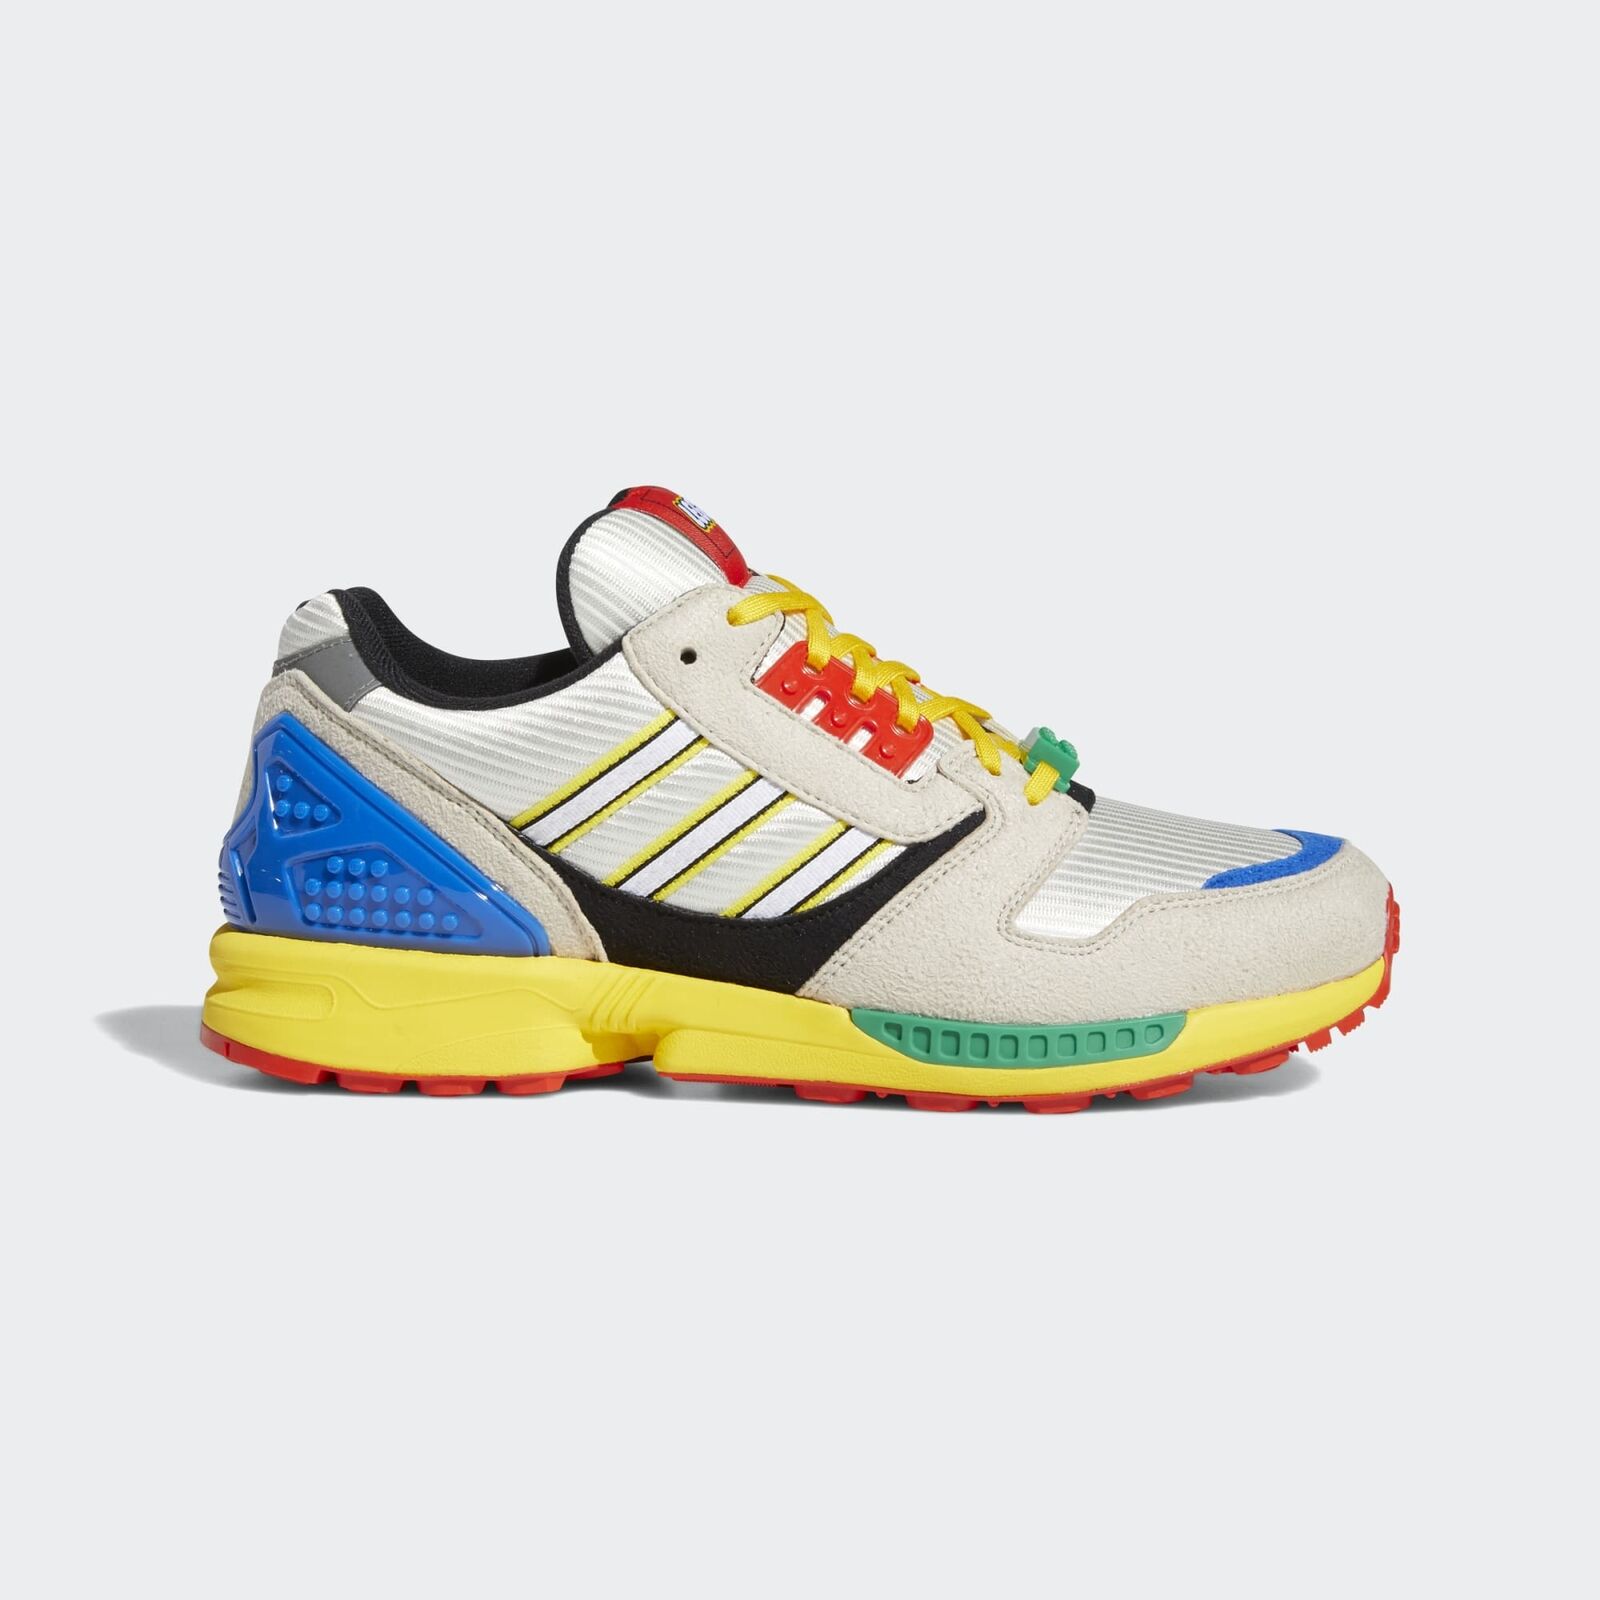 Adidas ZX 8000 LEGO Limited Edition Shoes Men's Size 6-13 FZ3482